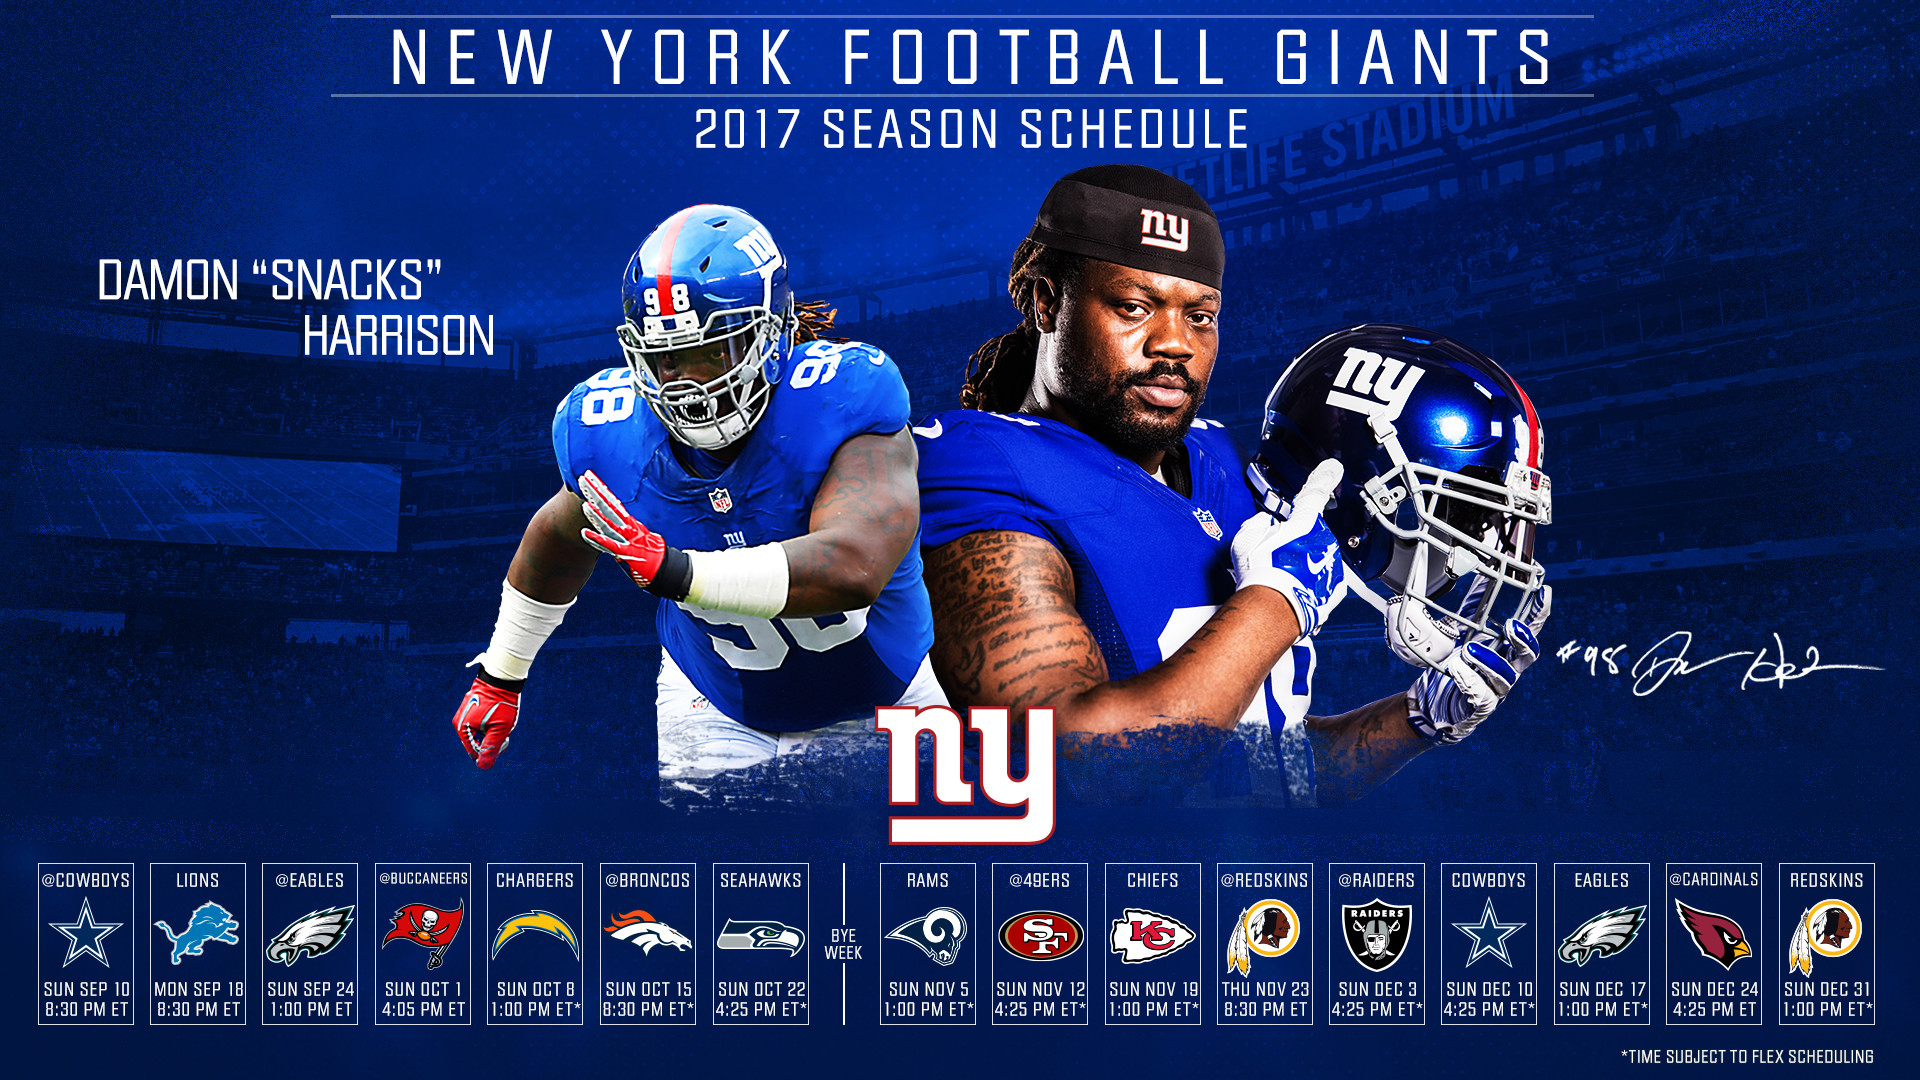 Click one of the thumbnails below to download the New York Giants 2017 schedule desktop wallpaper. For desktop wallpapers, right click on the image and other